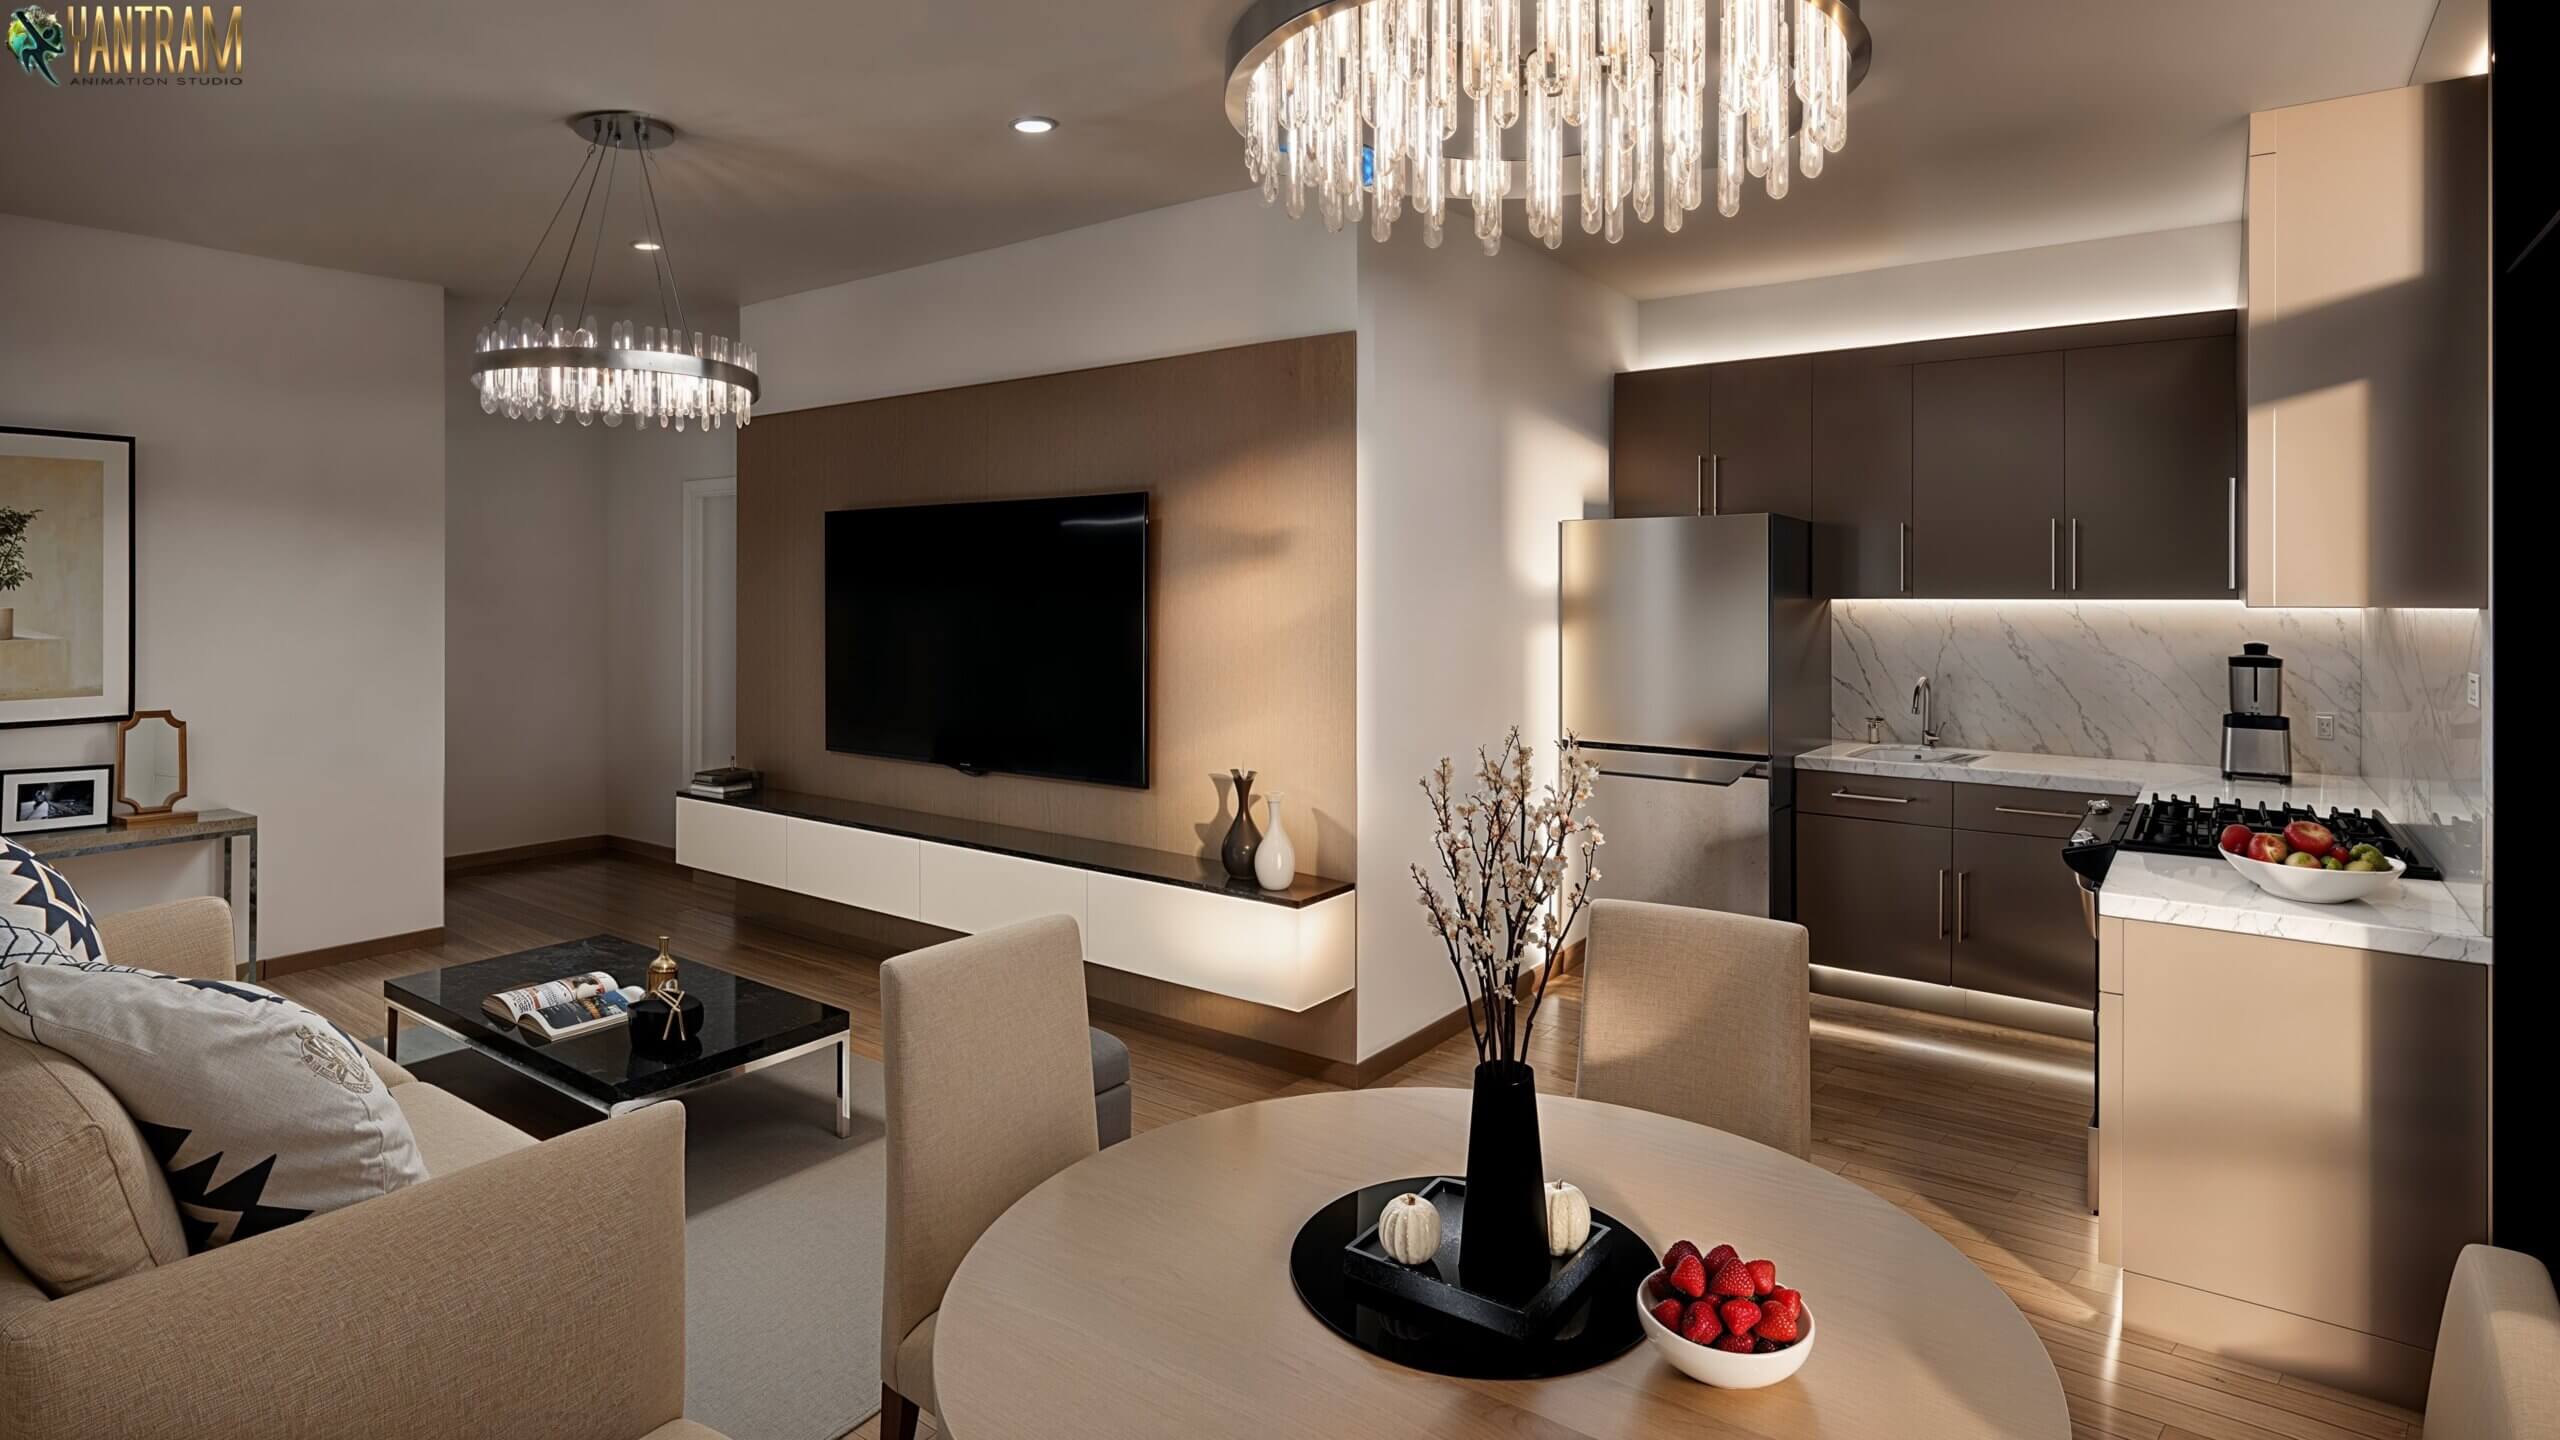 Illuminating Interiors Transforming Spaces with 3D Architectural Rendering and Lighting Expertise 1